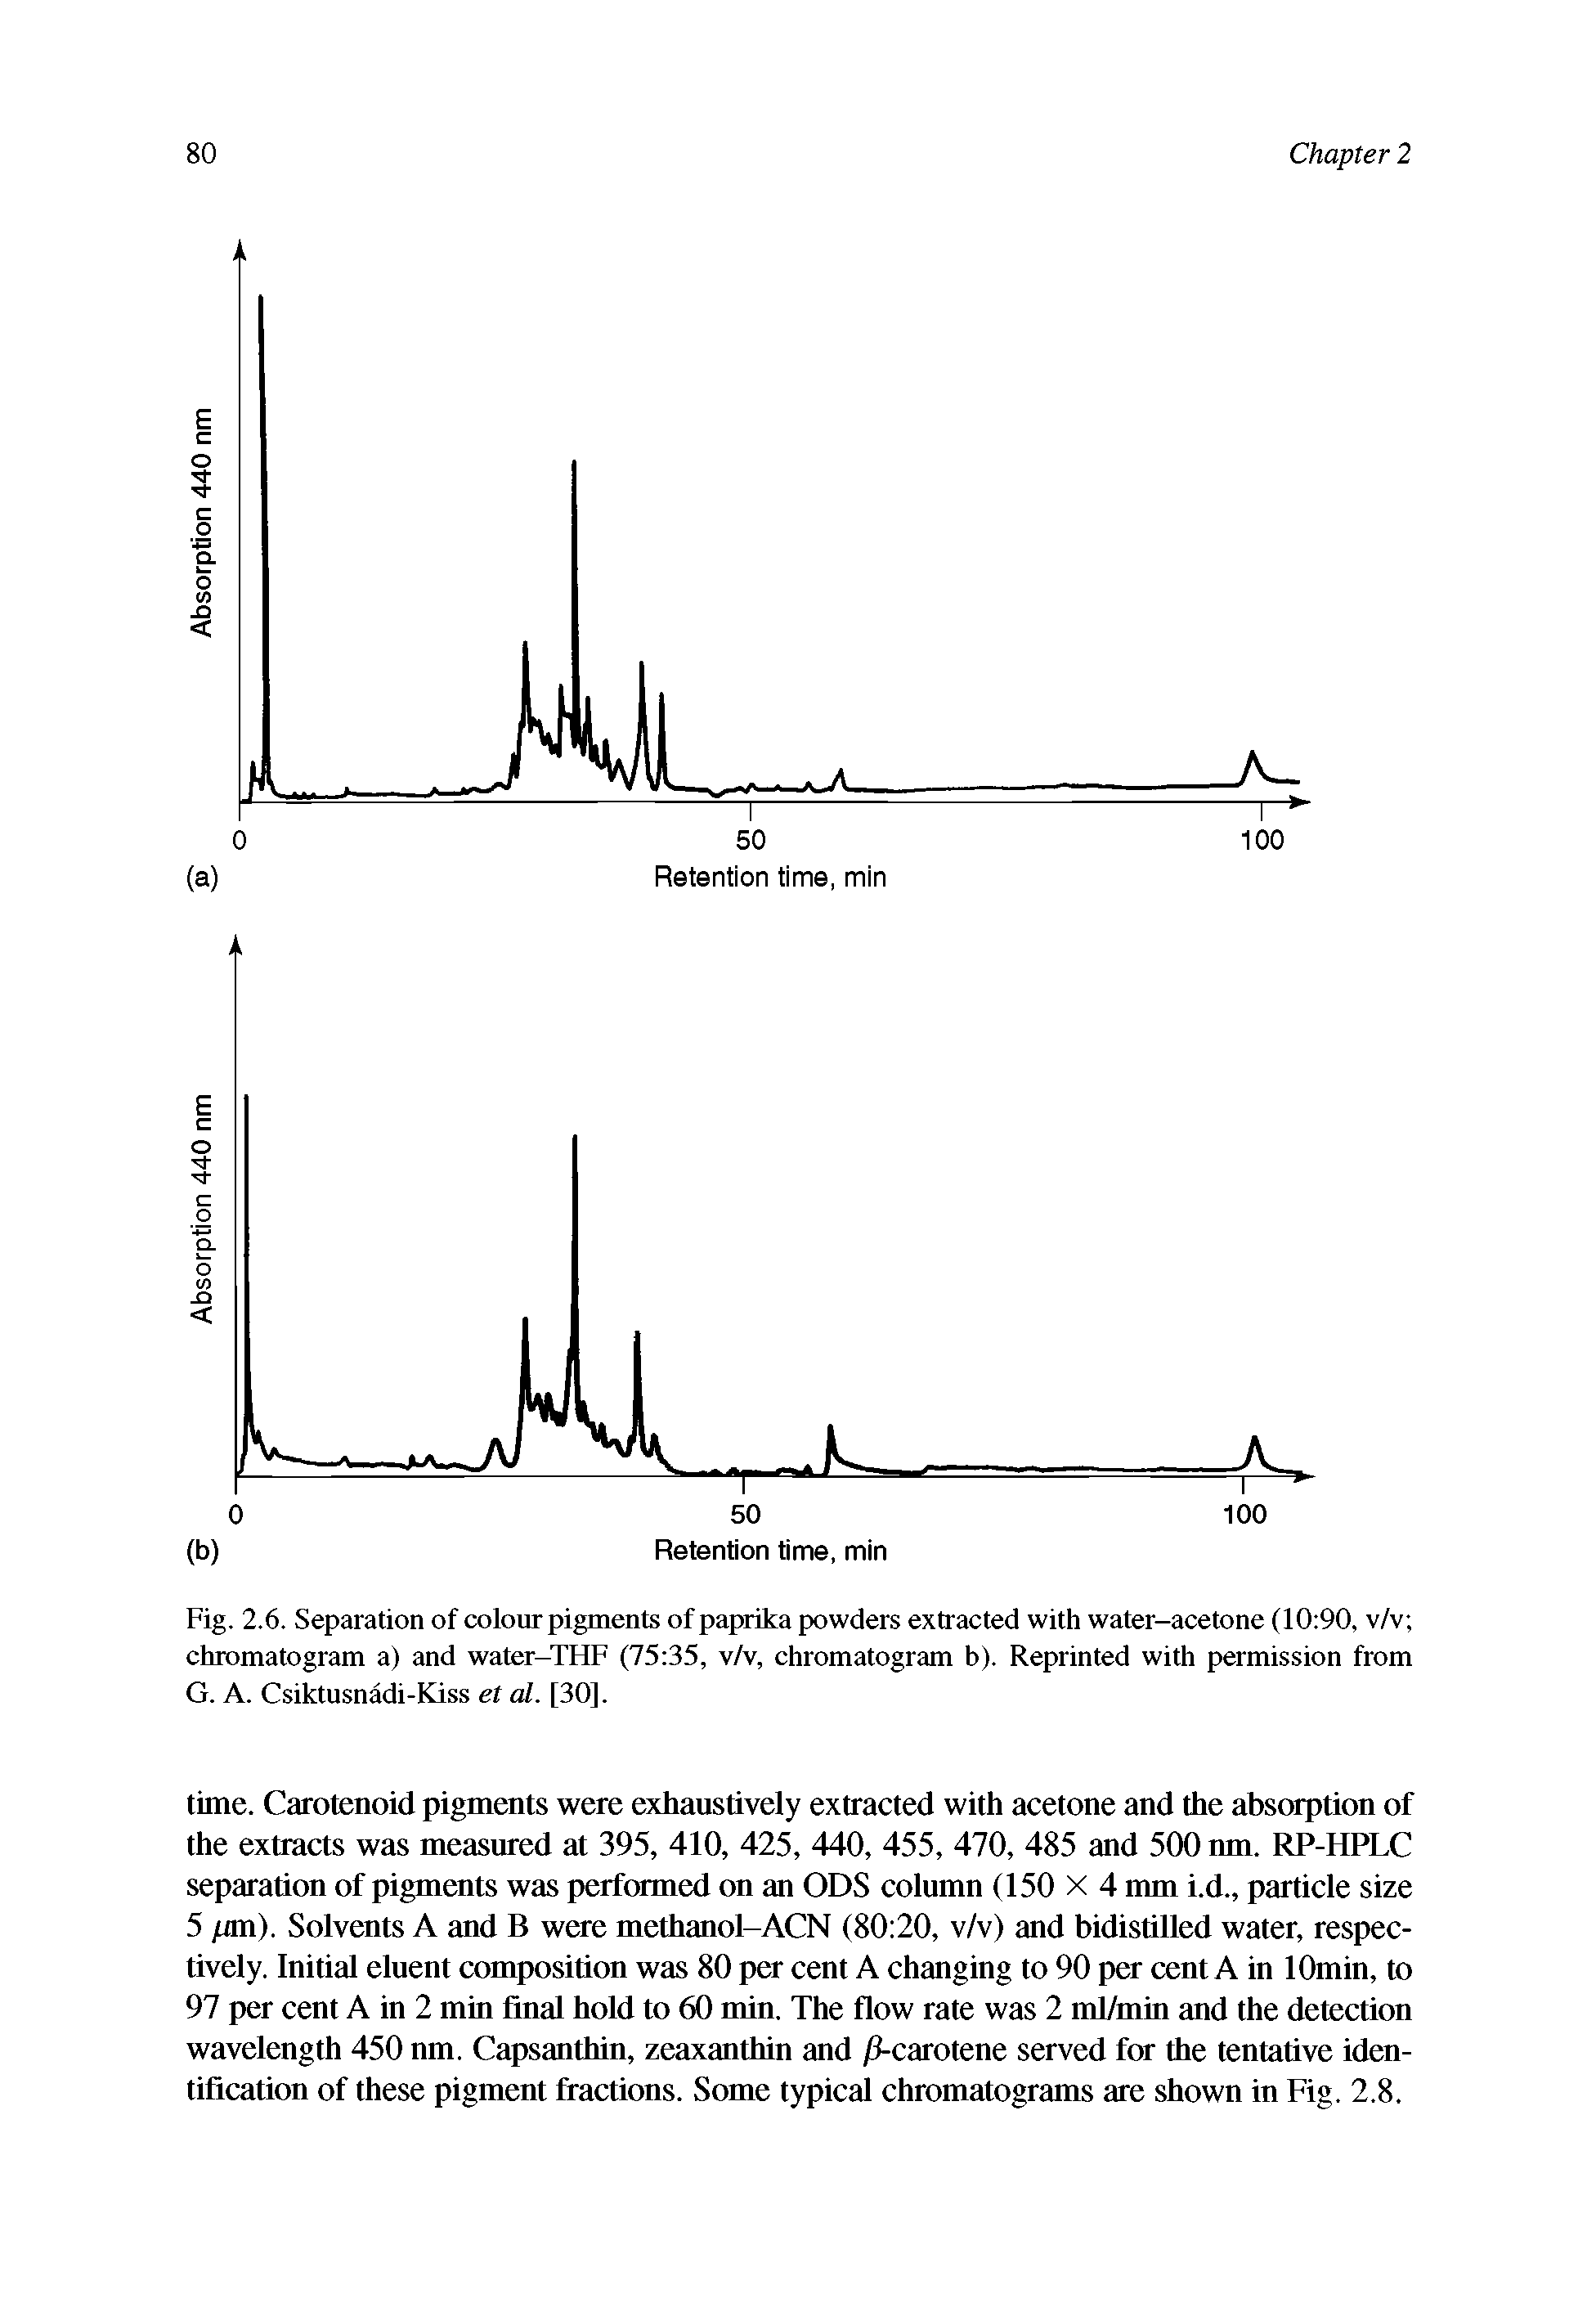 Fig. 2.6. Separation of colour pigments of paprika powders extracted with water-acetone (10 90, v/v chromatogram a) and water-THF (75 35, v/v, chromatogram b). Reprinted with permission from G. A. Csiktusnadi-Kiss el al. [30].